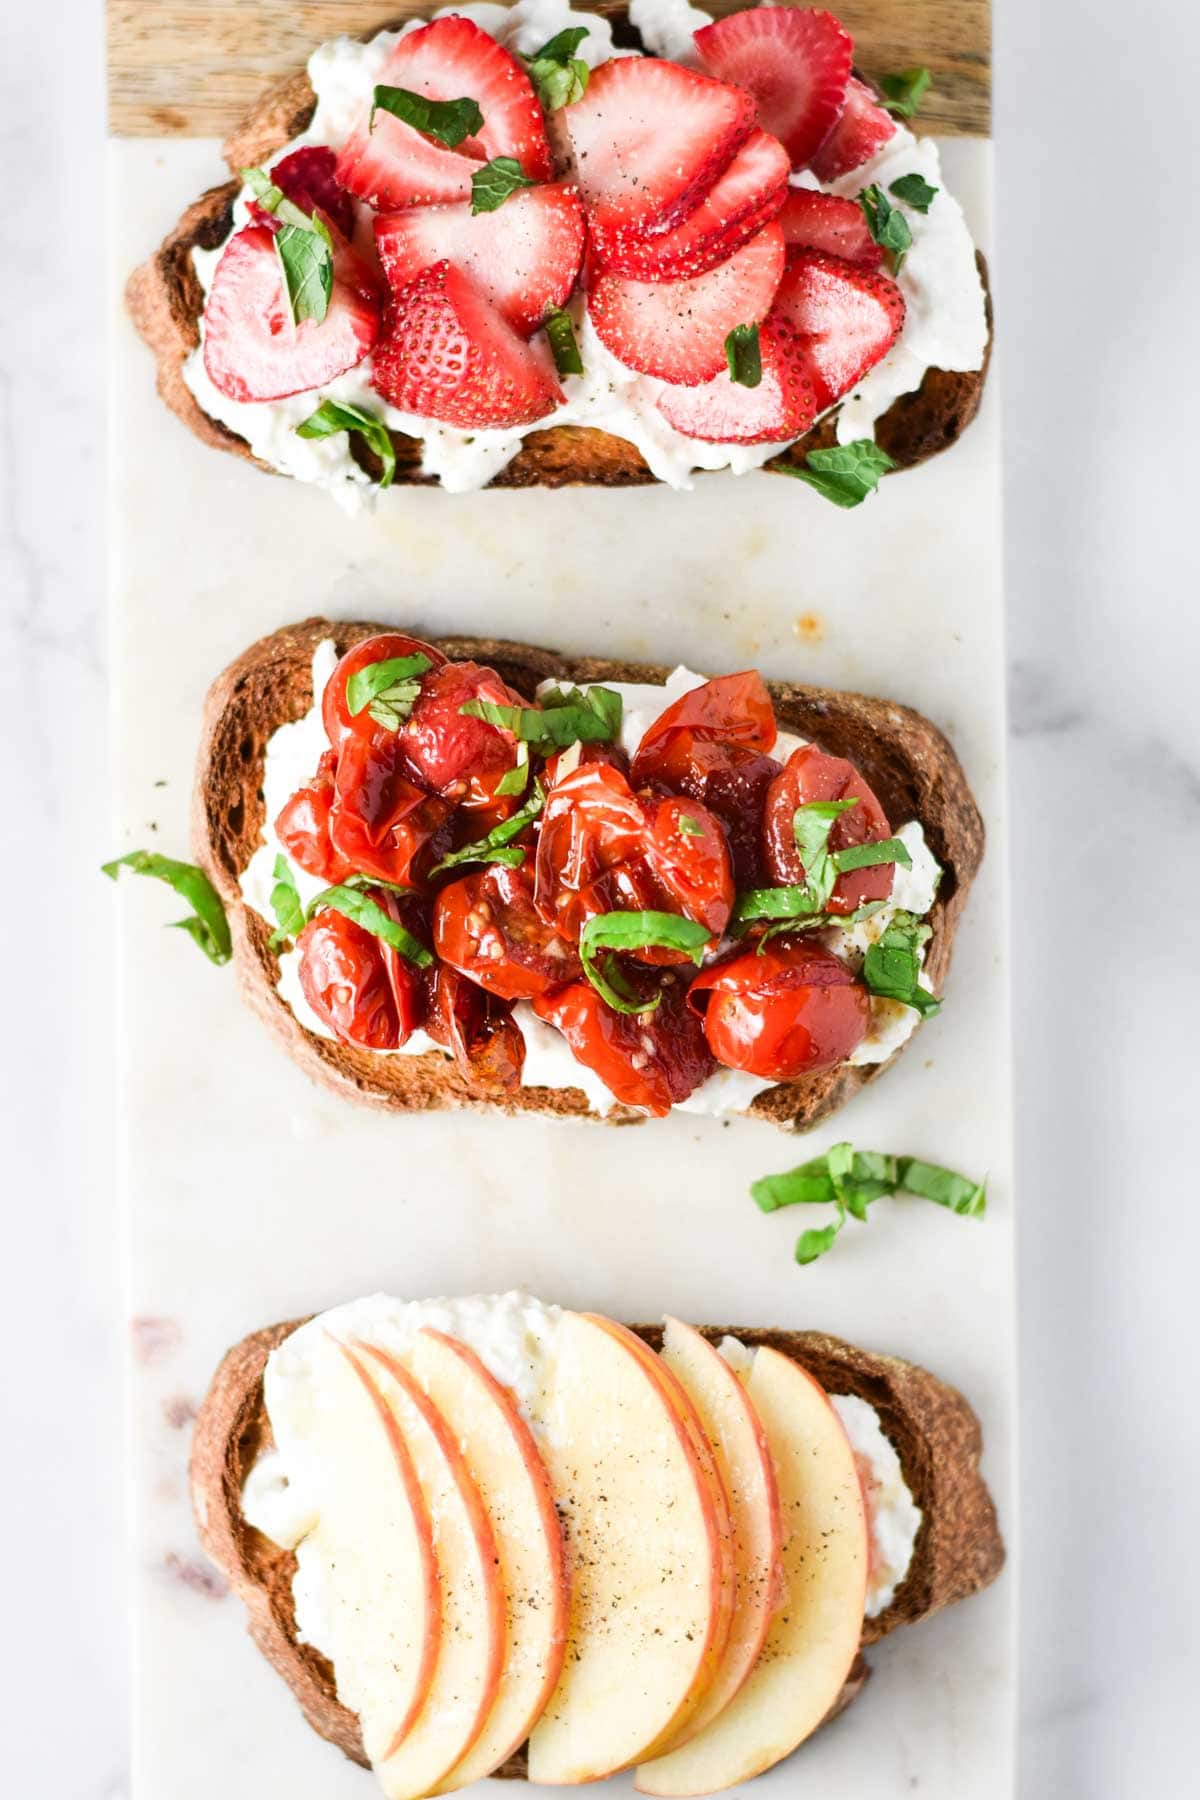 Three burrata toasts topped with fruits and herbs.